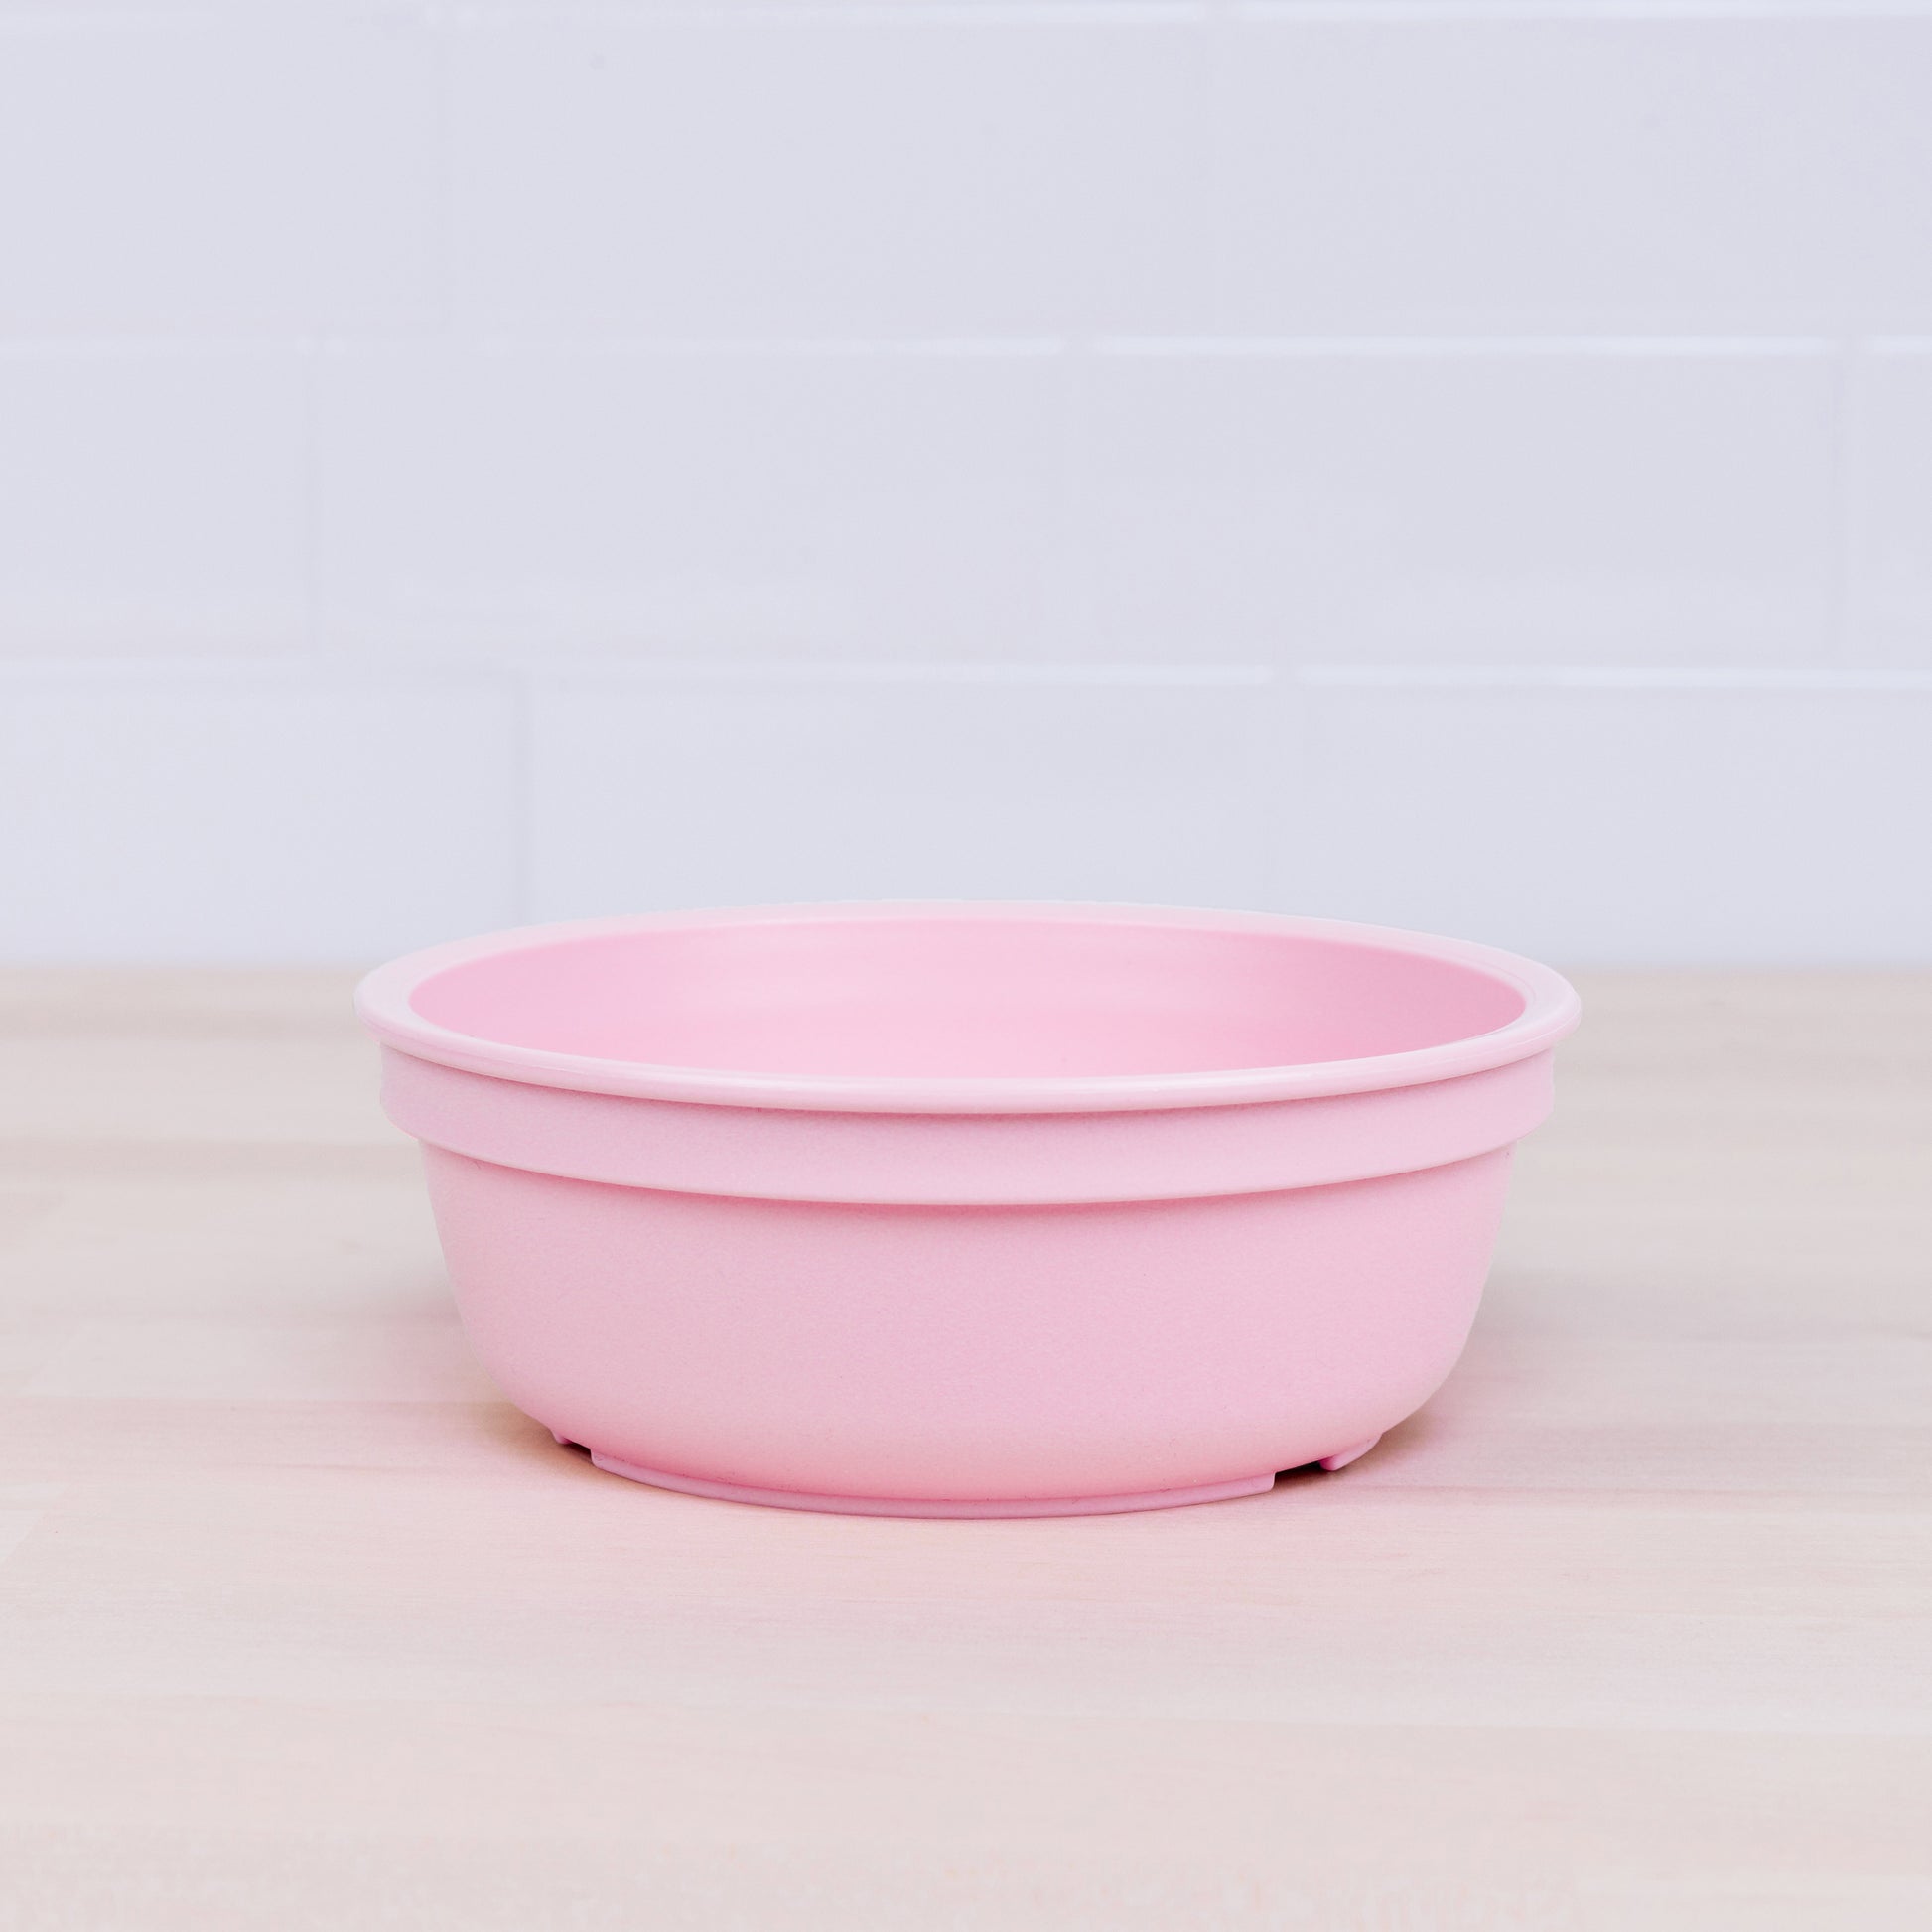 Re-Play Bowl | Standard Size in Ice Pink from Bear & Moo